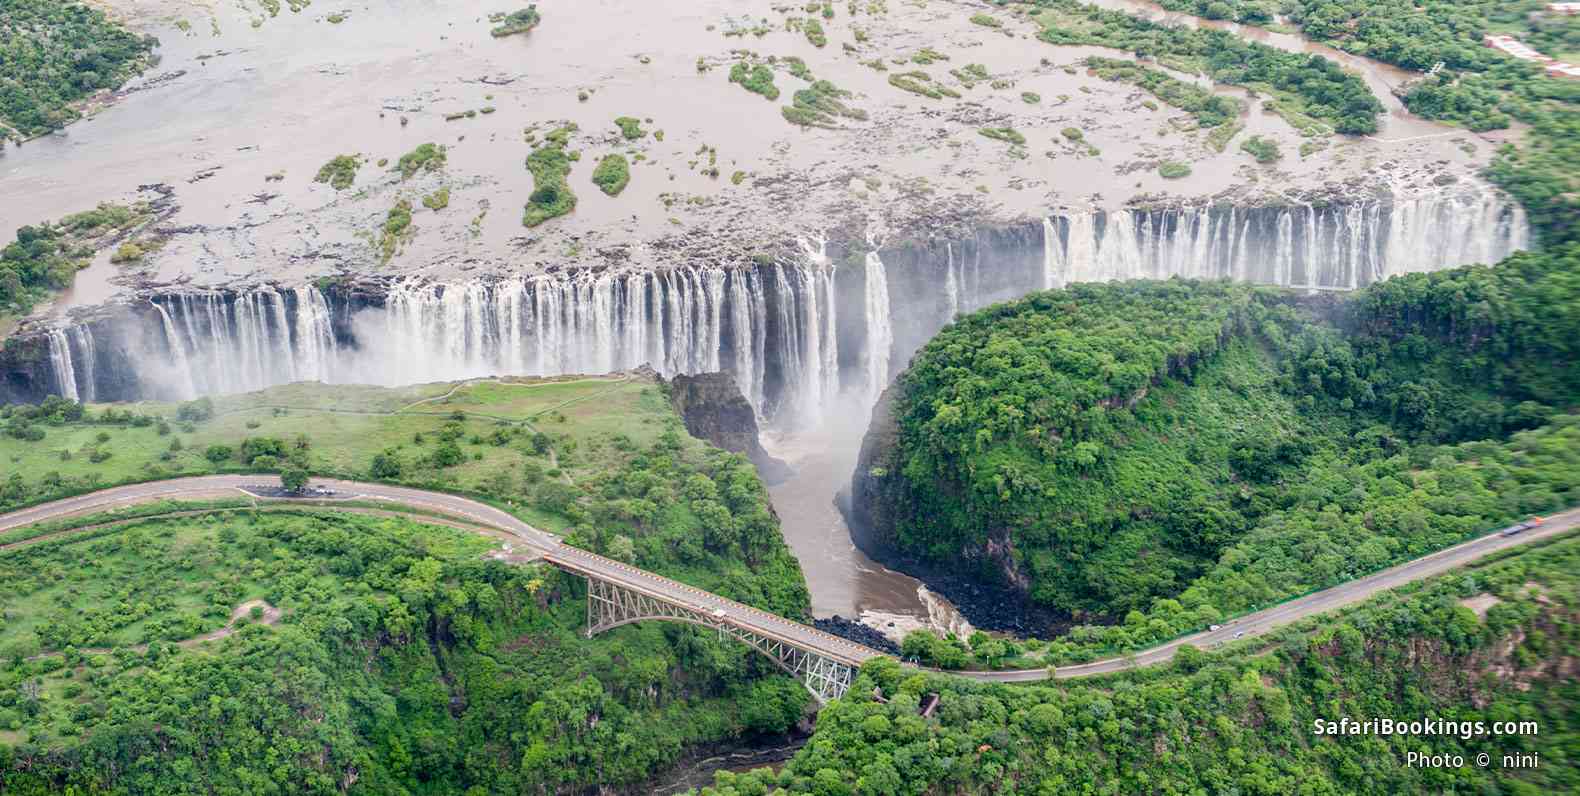 Aerial view of Victoria Falls and the Victoria Falls Bridge, which connects Zambia and Zimbabwe